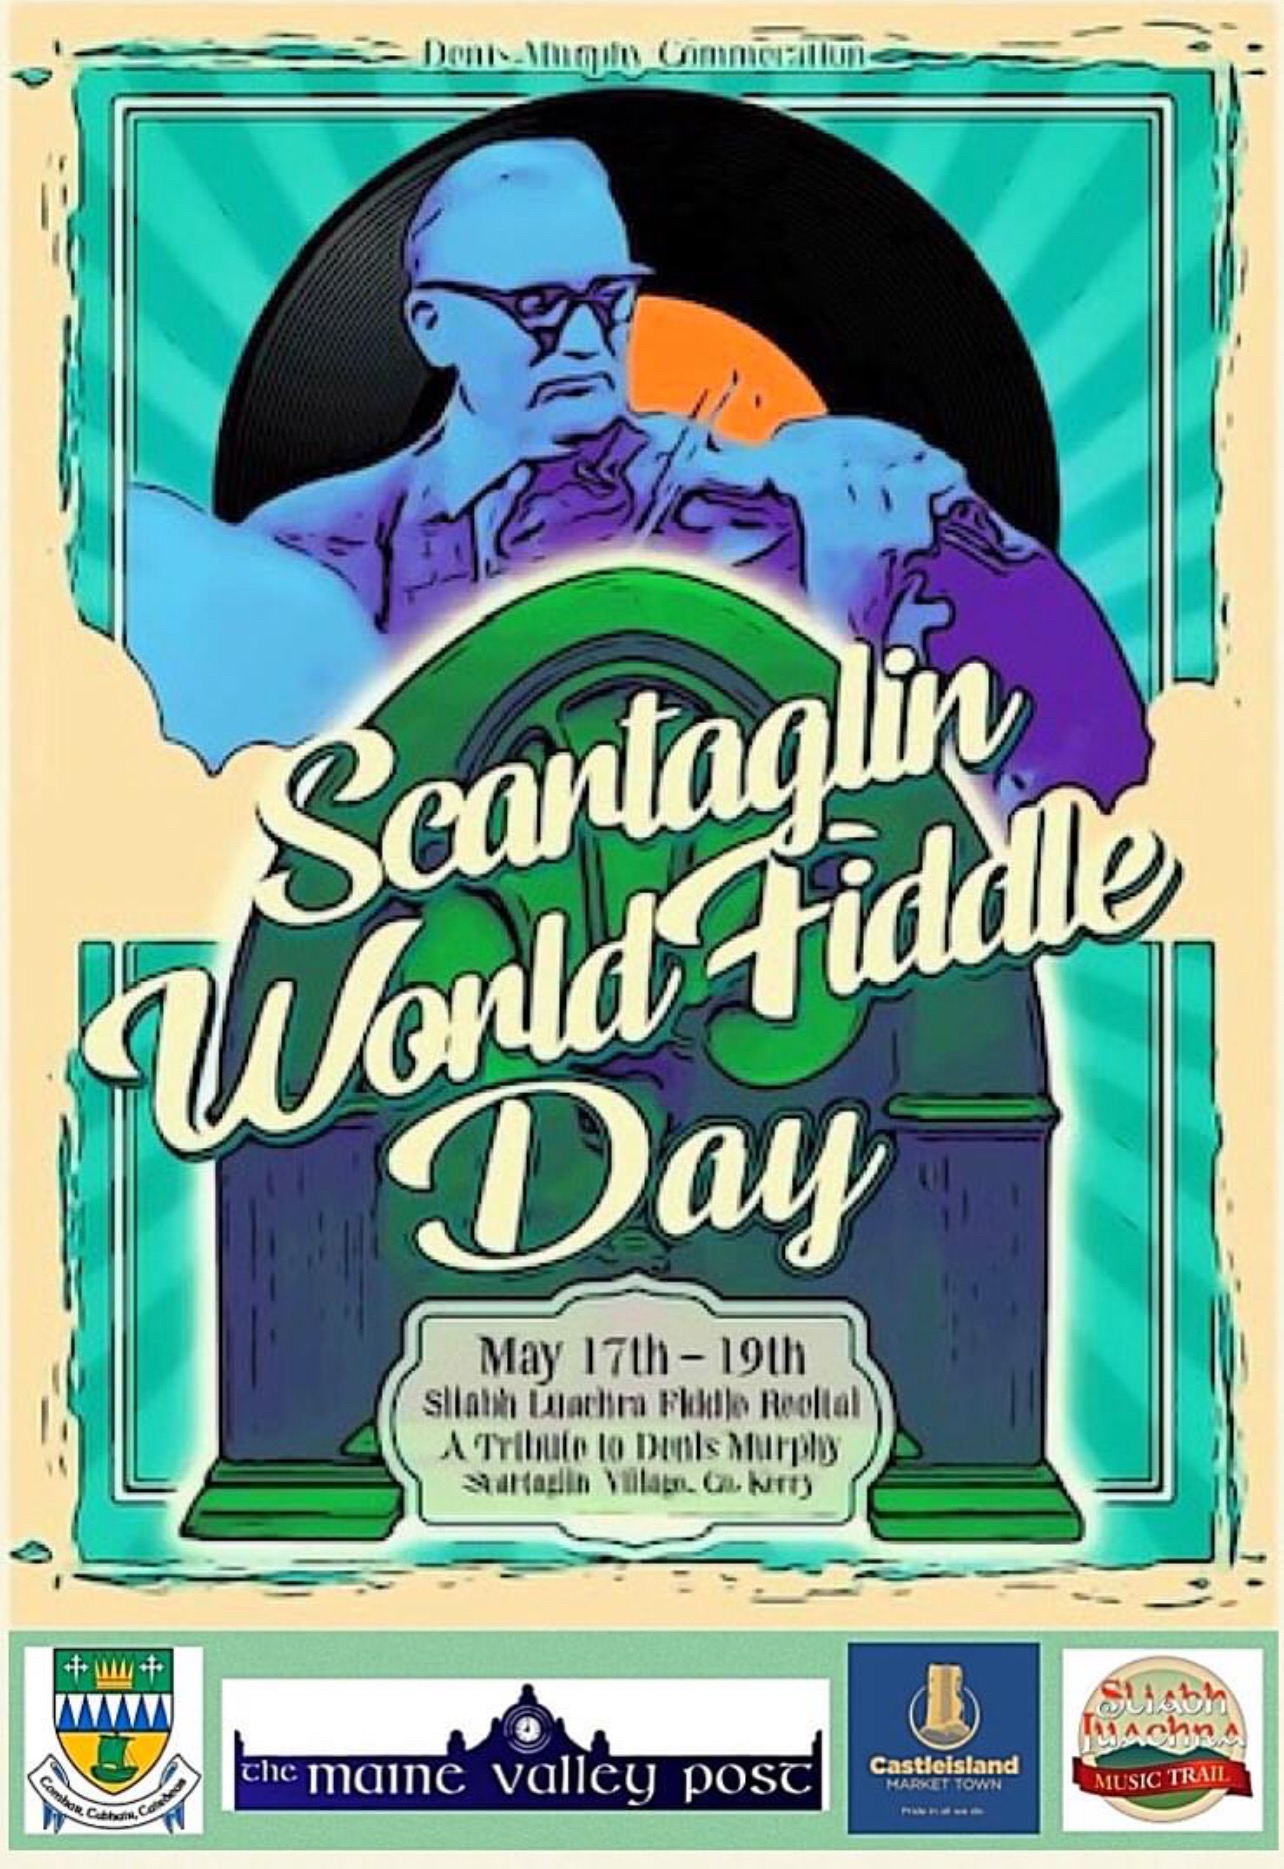 World Fiddle Day Recital Scartaglin  “ A Tribute to Denis Murphy” hosted by Aidan Connolly 